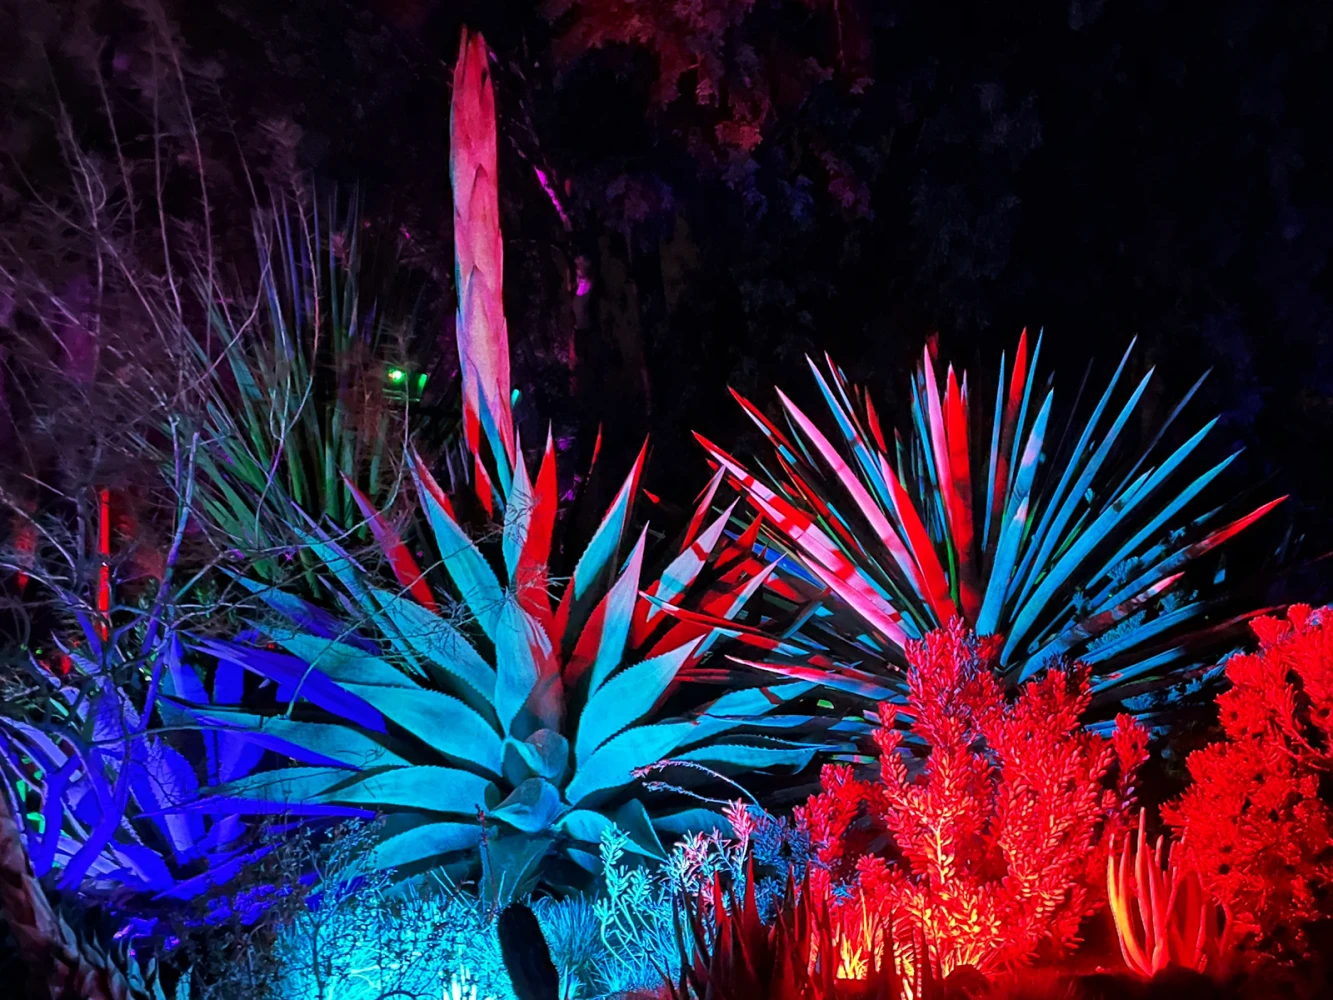 Garden of D’Lights: What to expect - 3